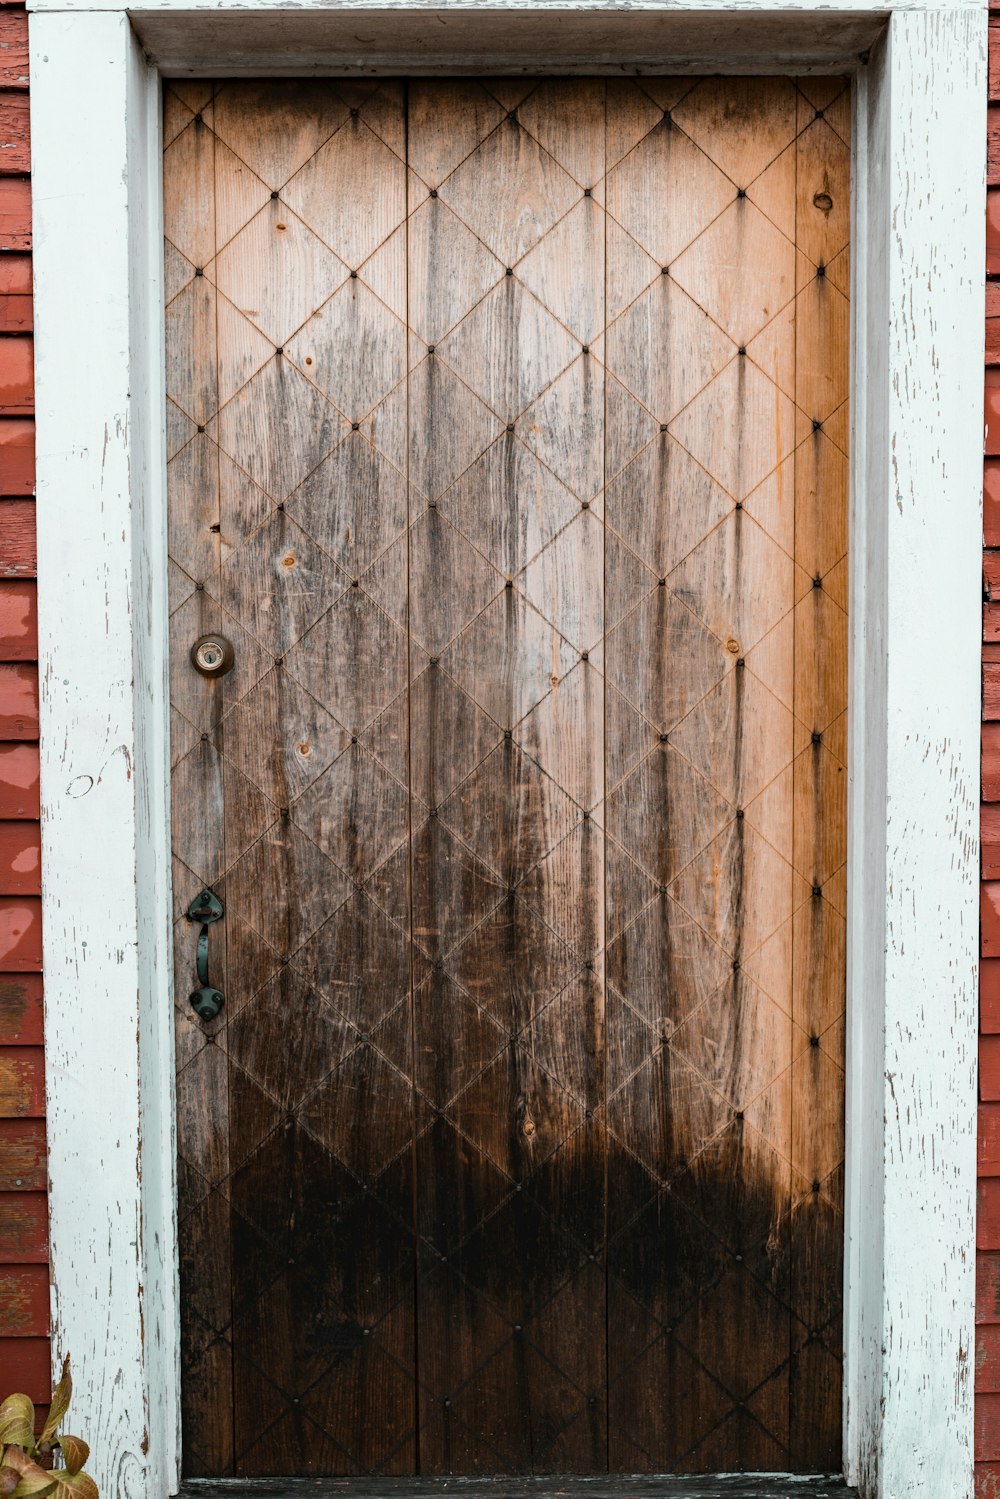 a wooden door with a brick wall behind it